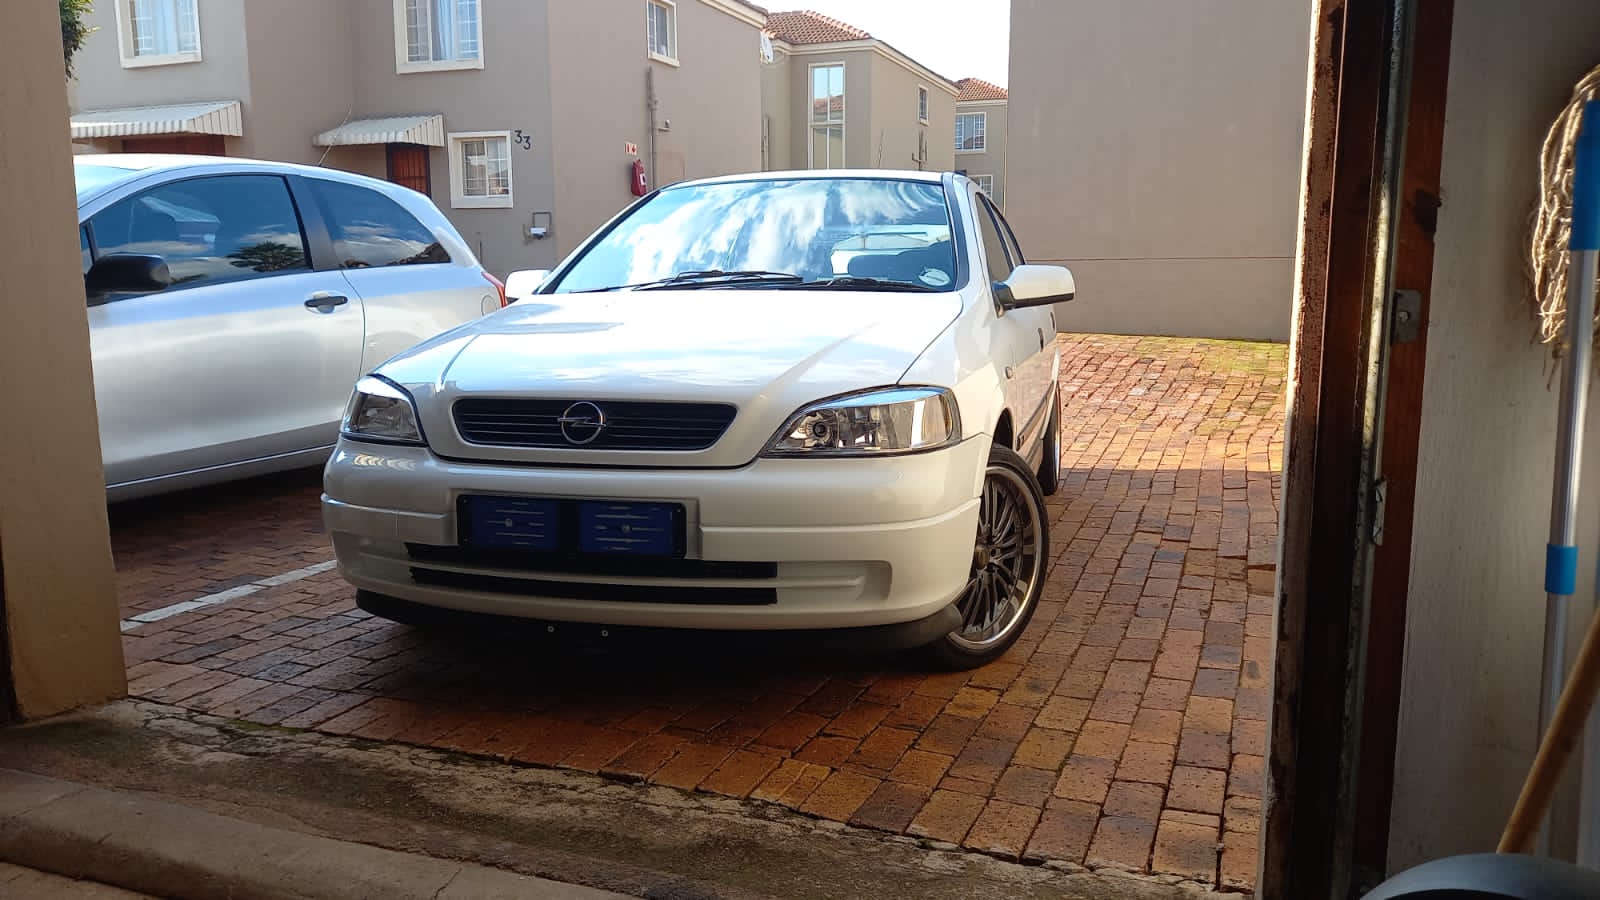 OPEL ASTRA opel-astra-g-tuning Used - the parking